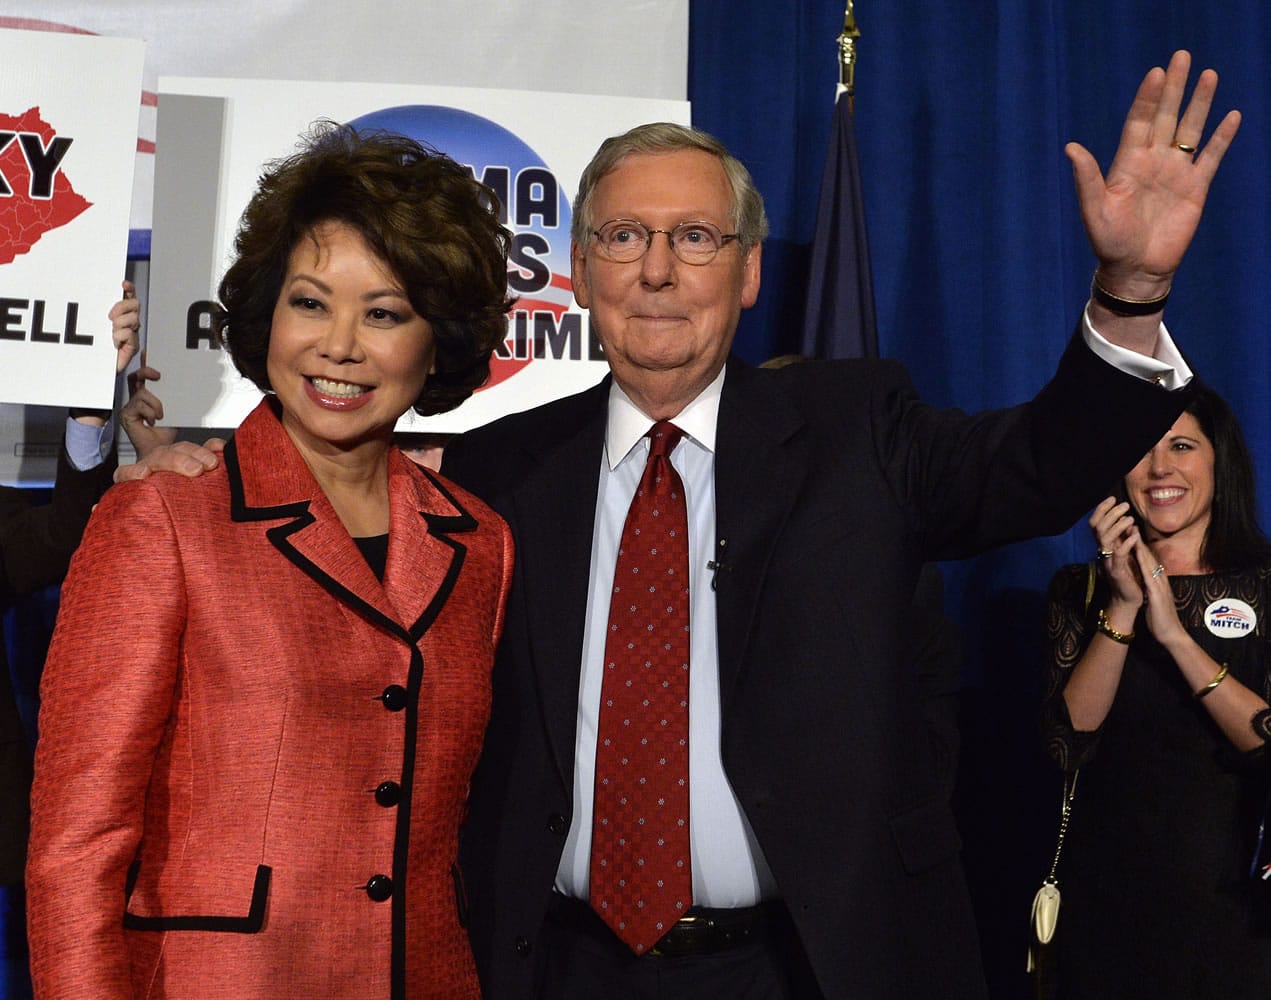 Kentucky Senator Mitch McConnell and his wife, Elaine Chao, wave to supporters following his victory in the Republican primary Tuesday in Louisville, Ky.